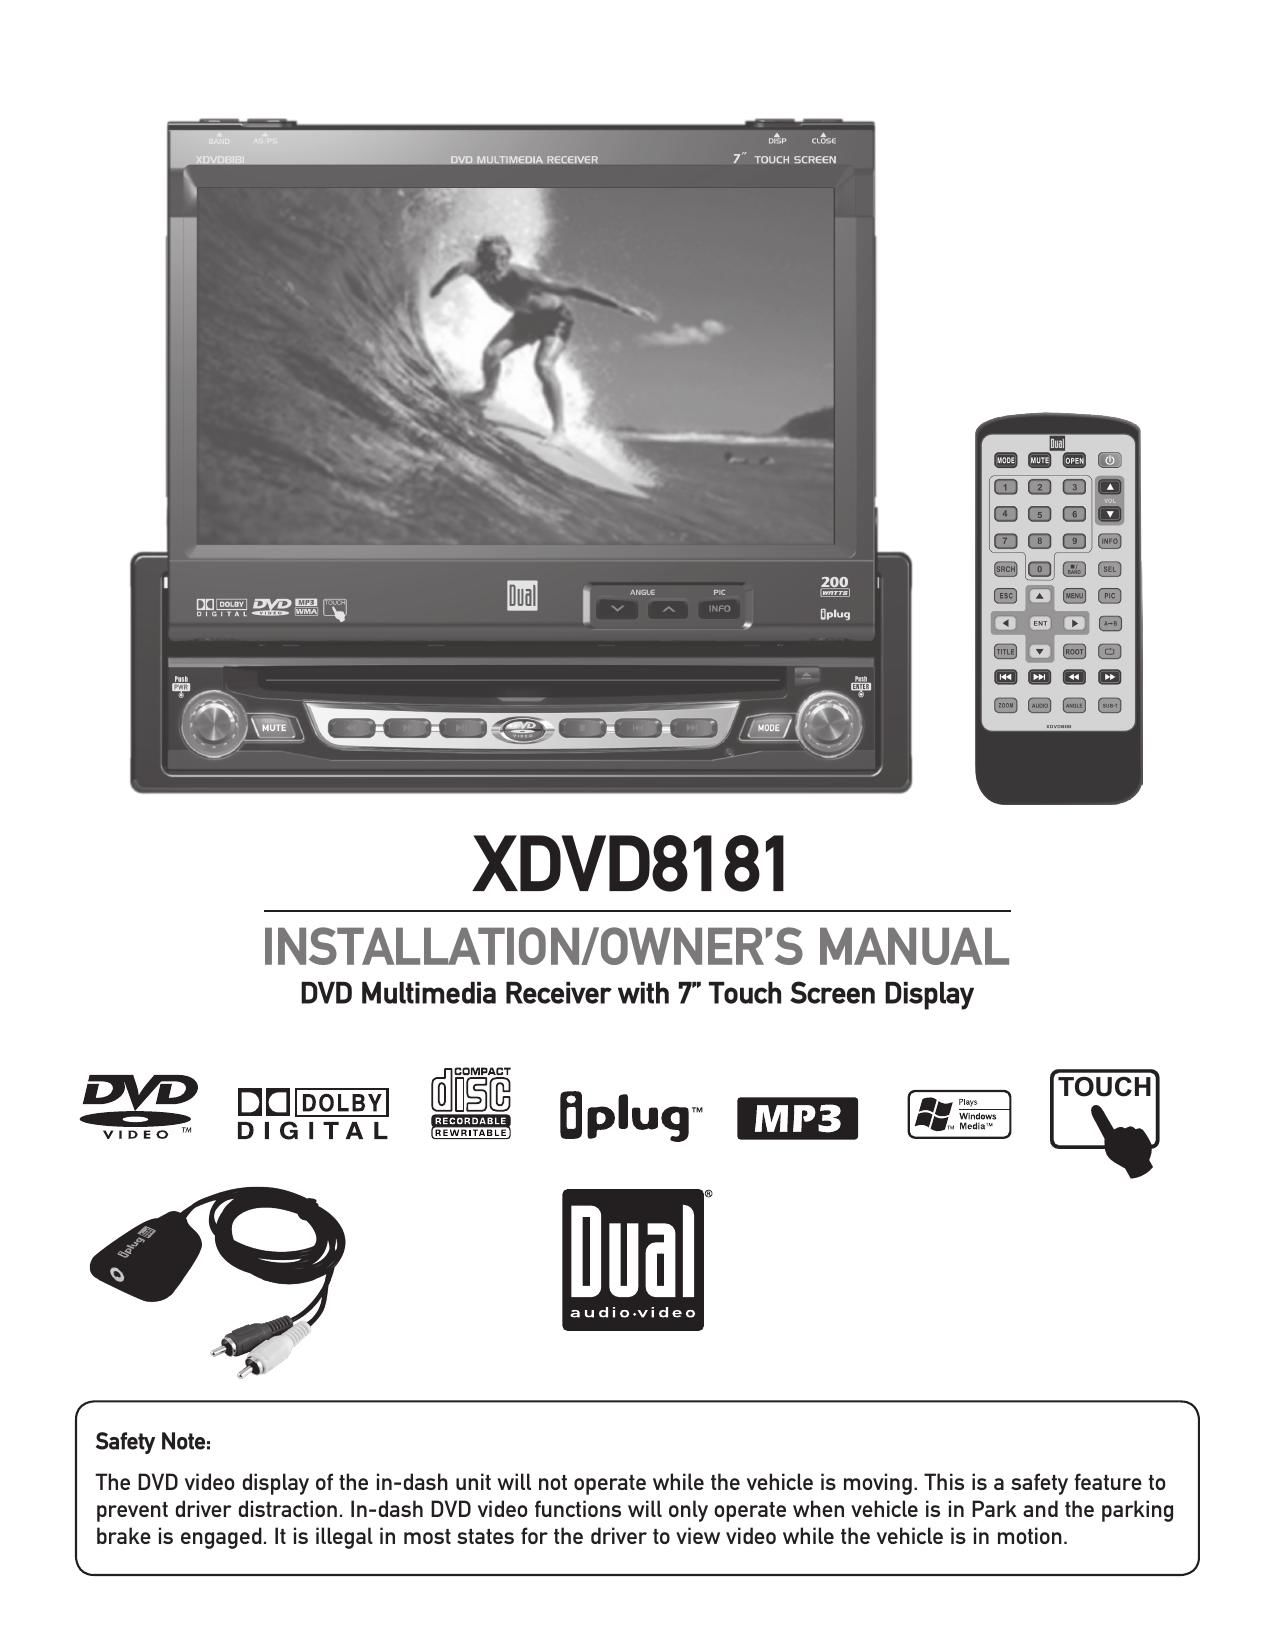 Dual XDVD 8181 Owners Manual